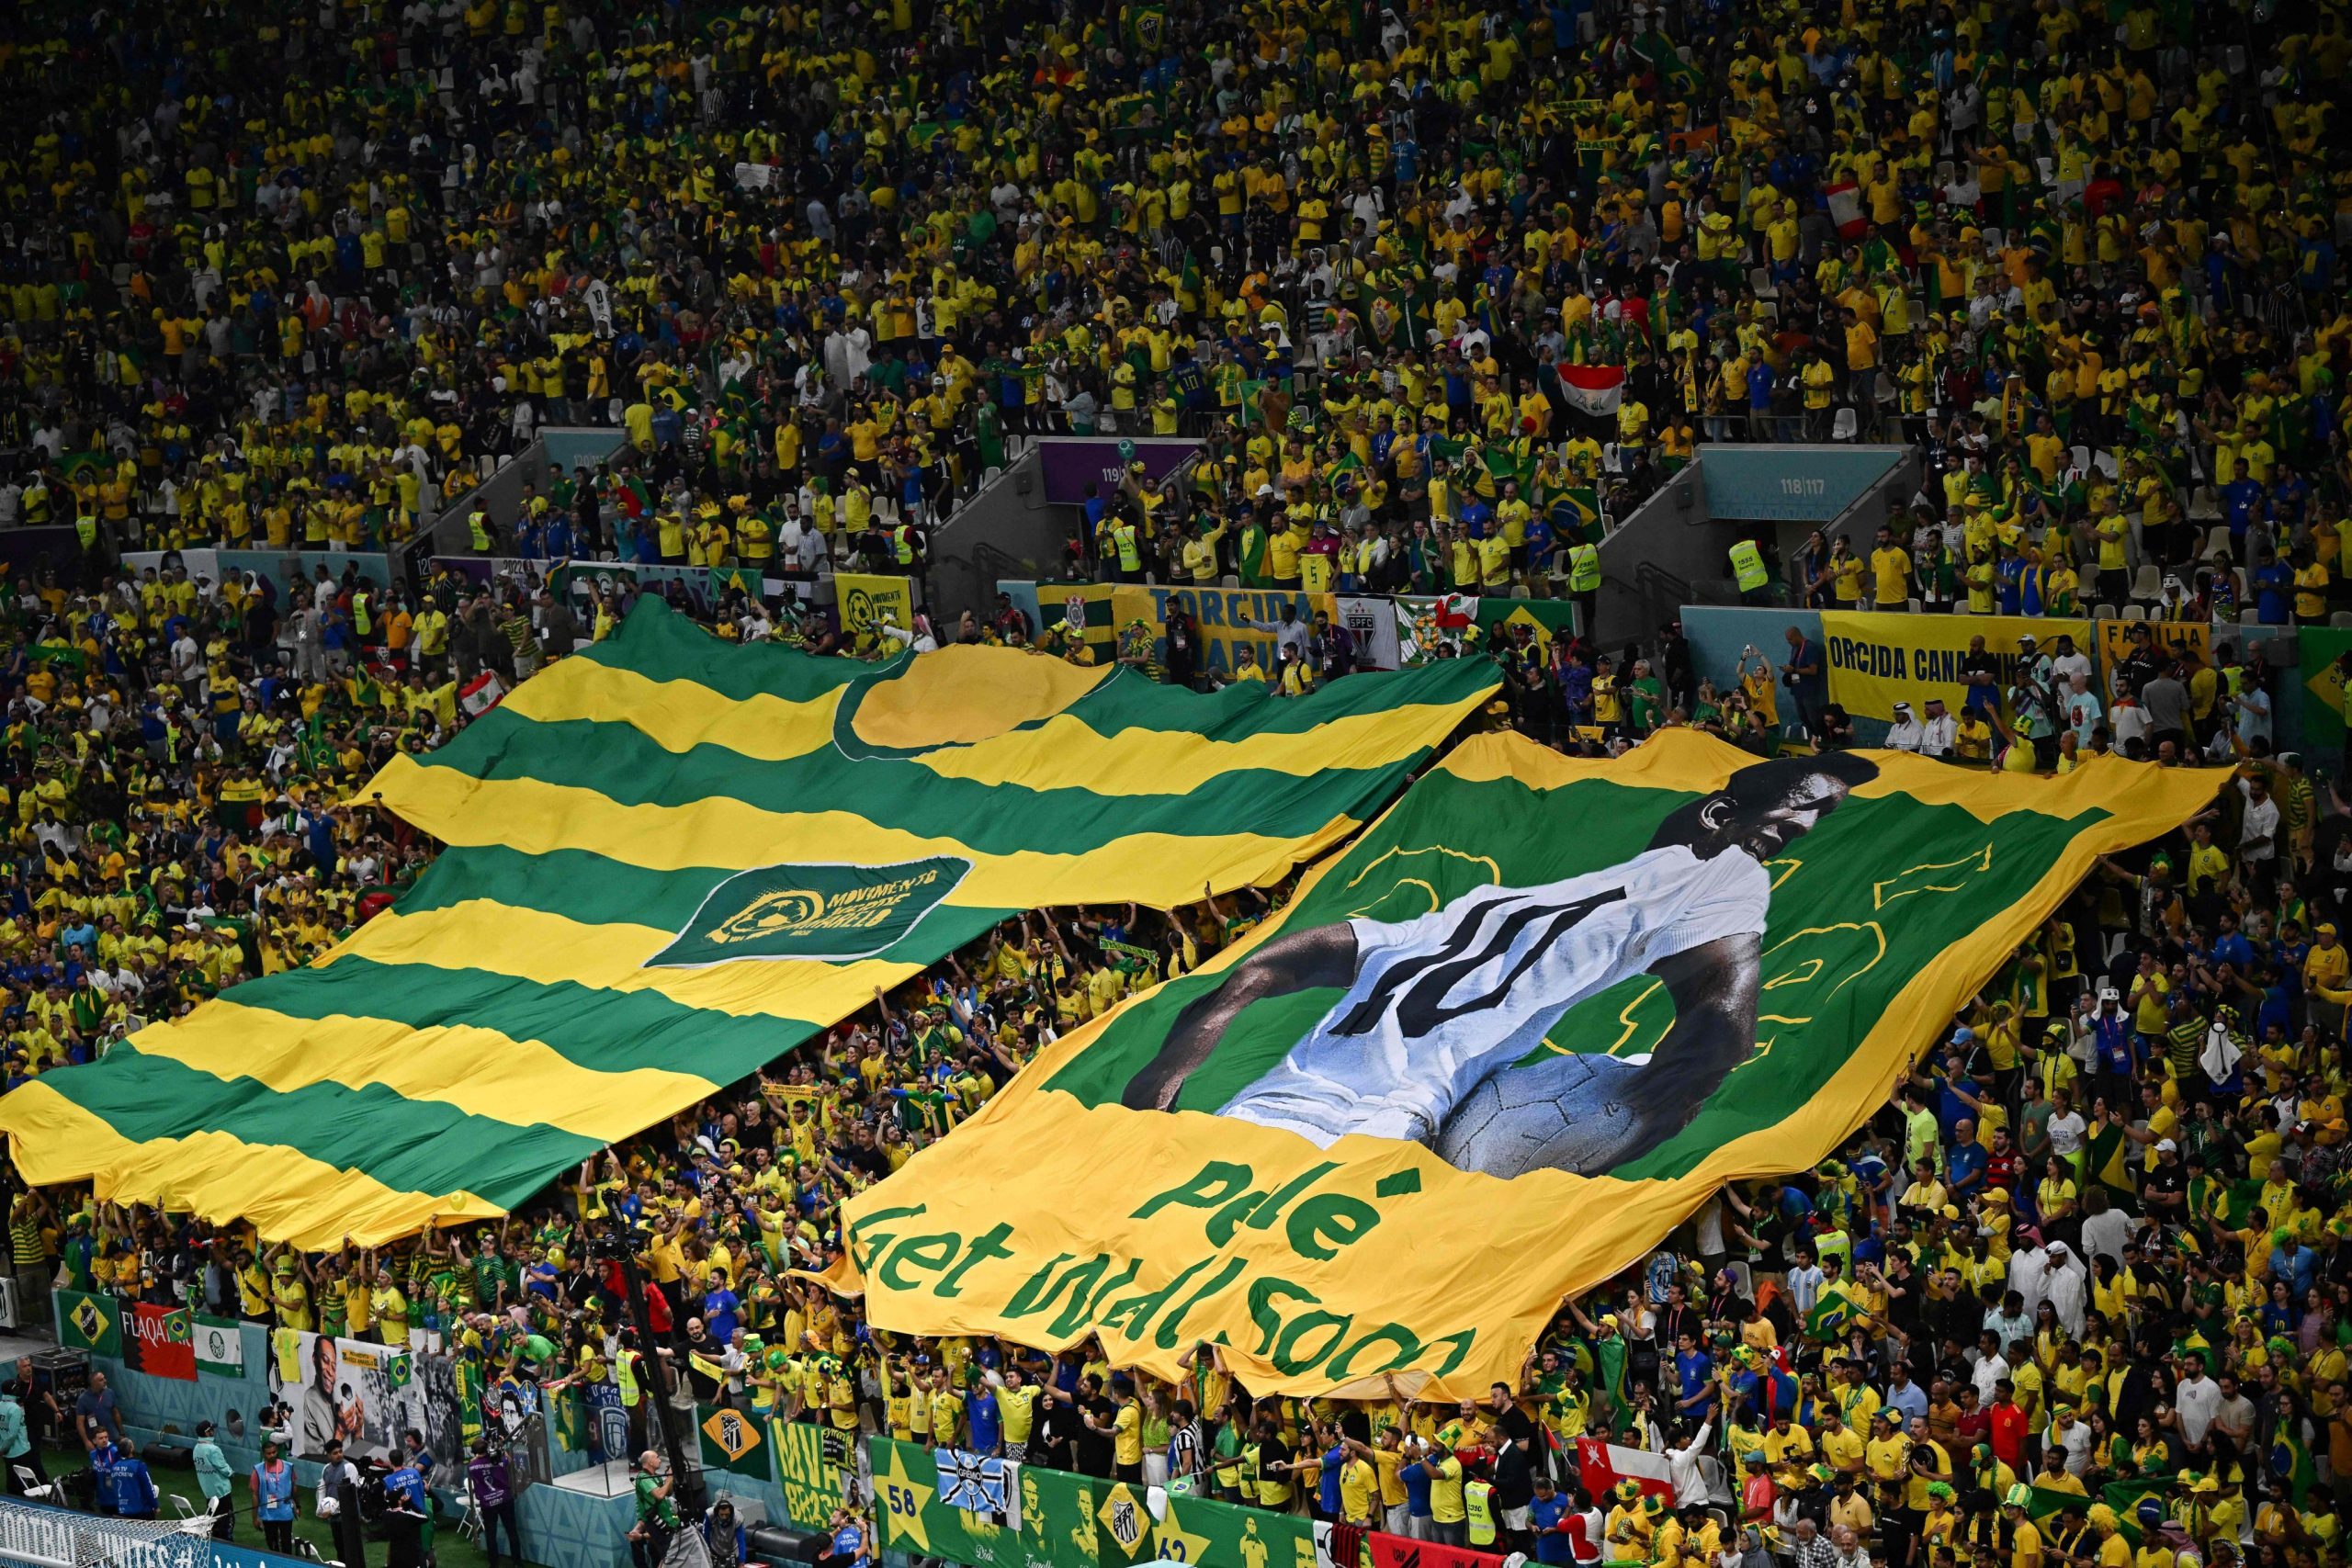 Watch: Brazil fans fly ‘Pele get well soon’ flag during FIFA World Cup 2022 match vs Cameroon